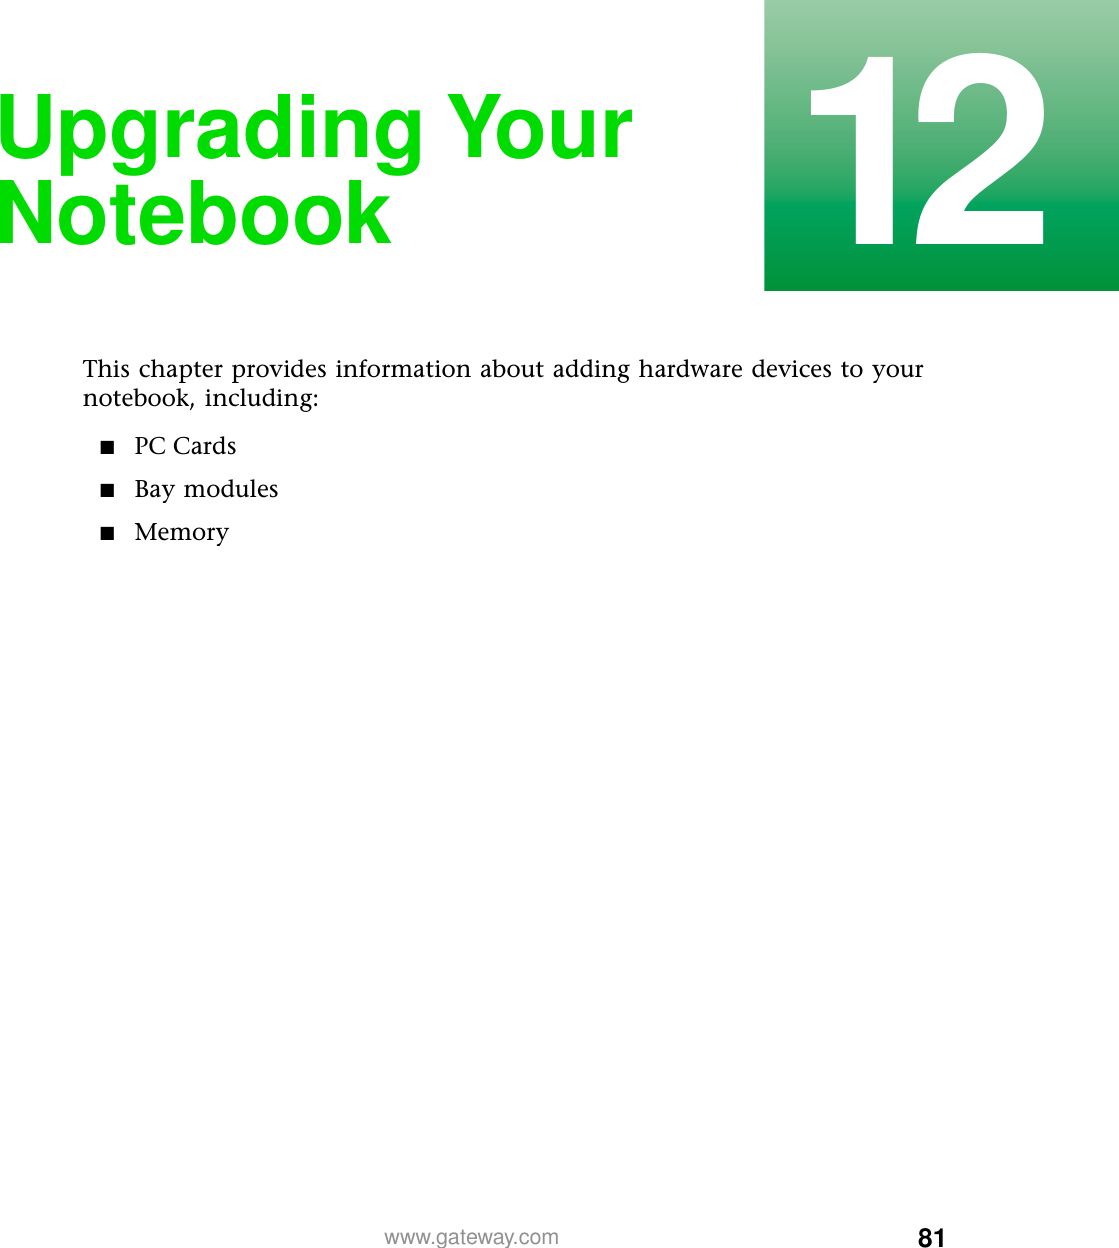 8112www.gateway.comUpgrading Your NotebookThis chapter provides information about adding hardware devices to your notebook, including:■PC Cards■Bay modules■Memory